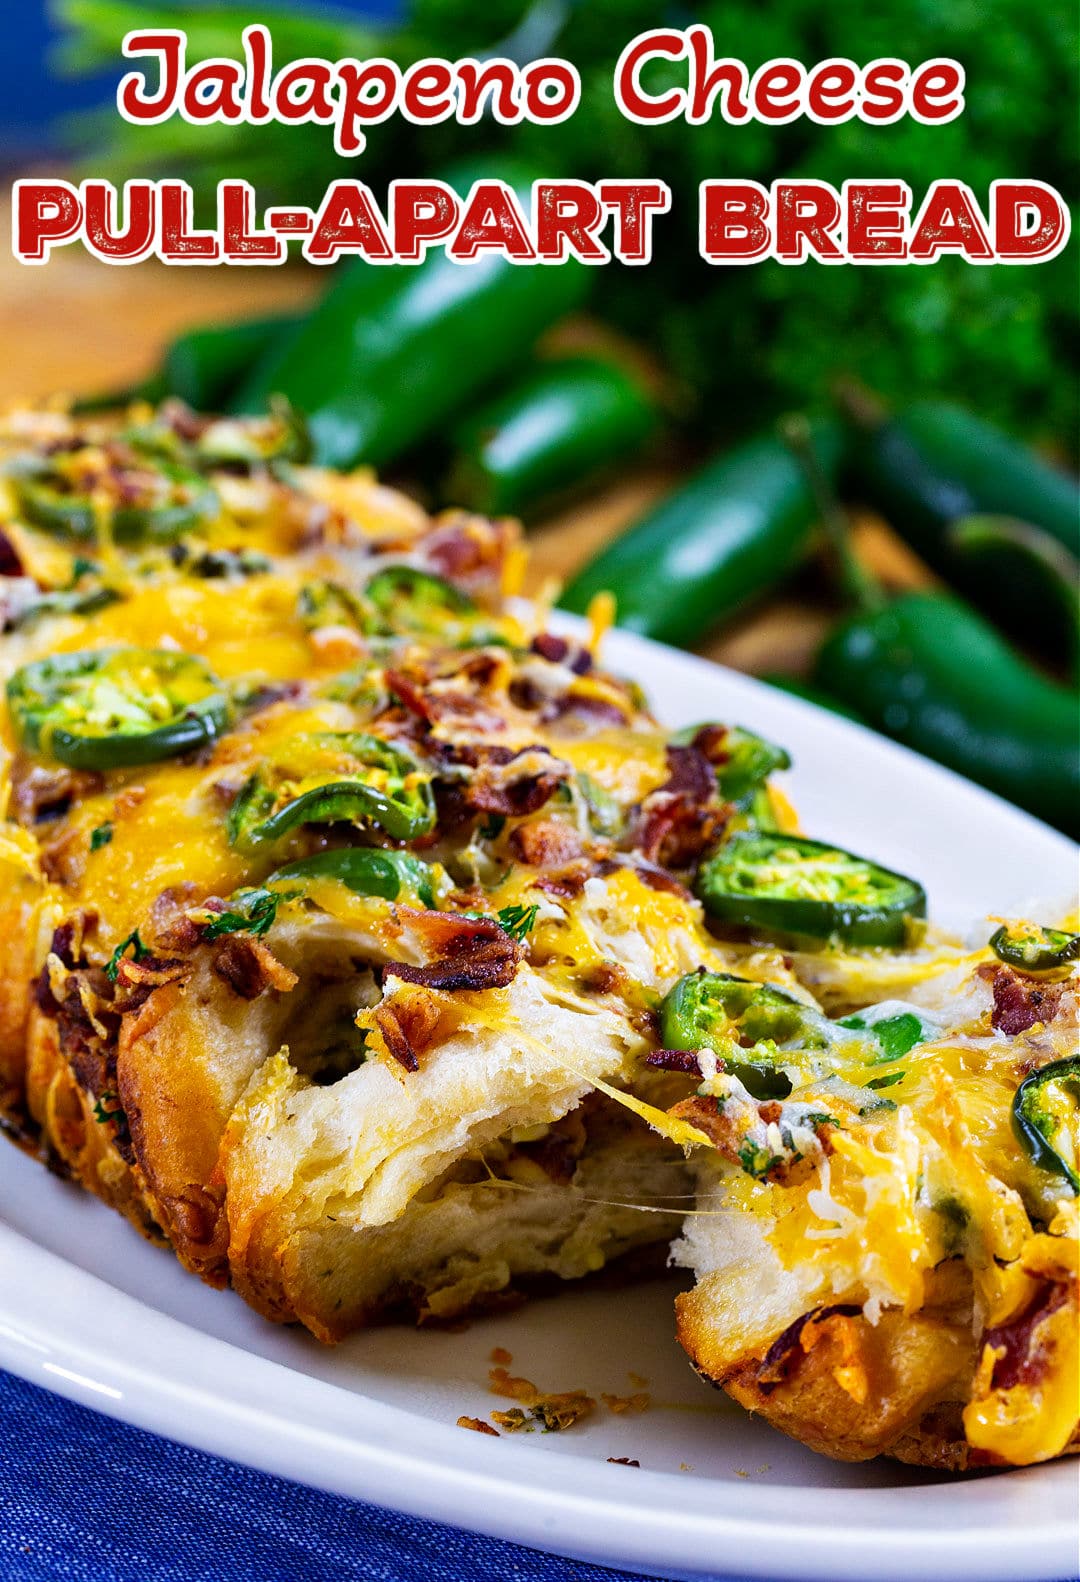 Jalapeno Cheese Pull-Apart Bread on serving plate.